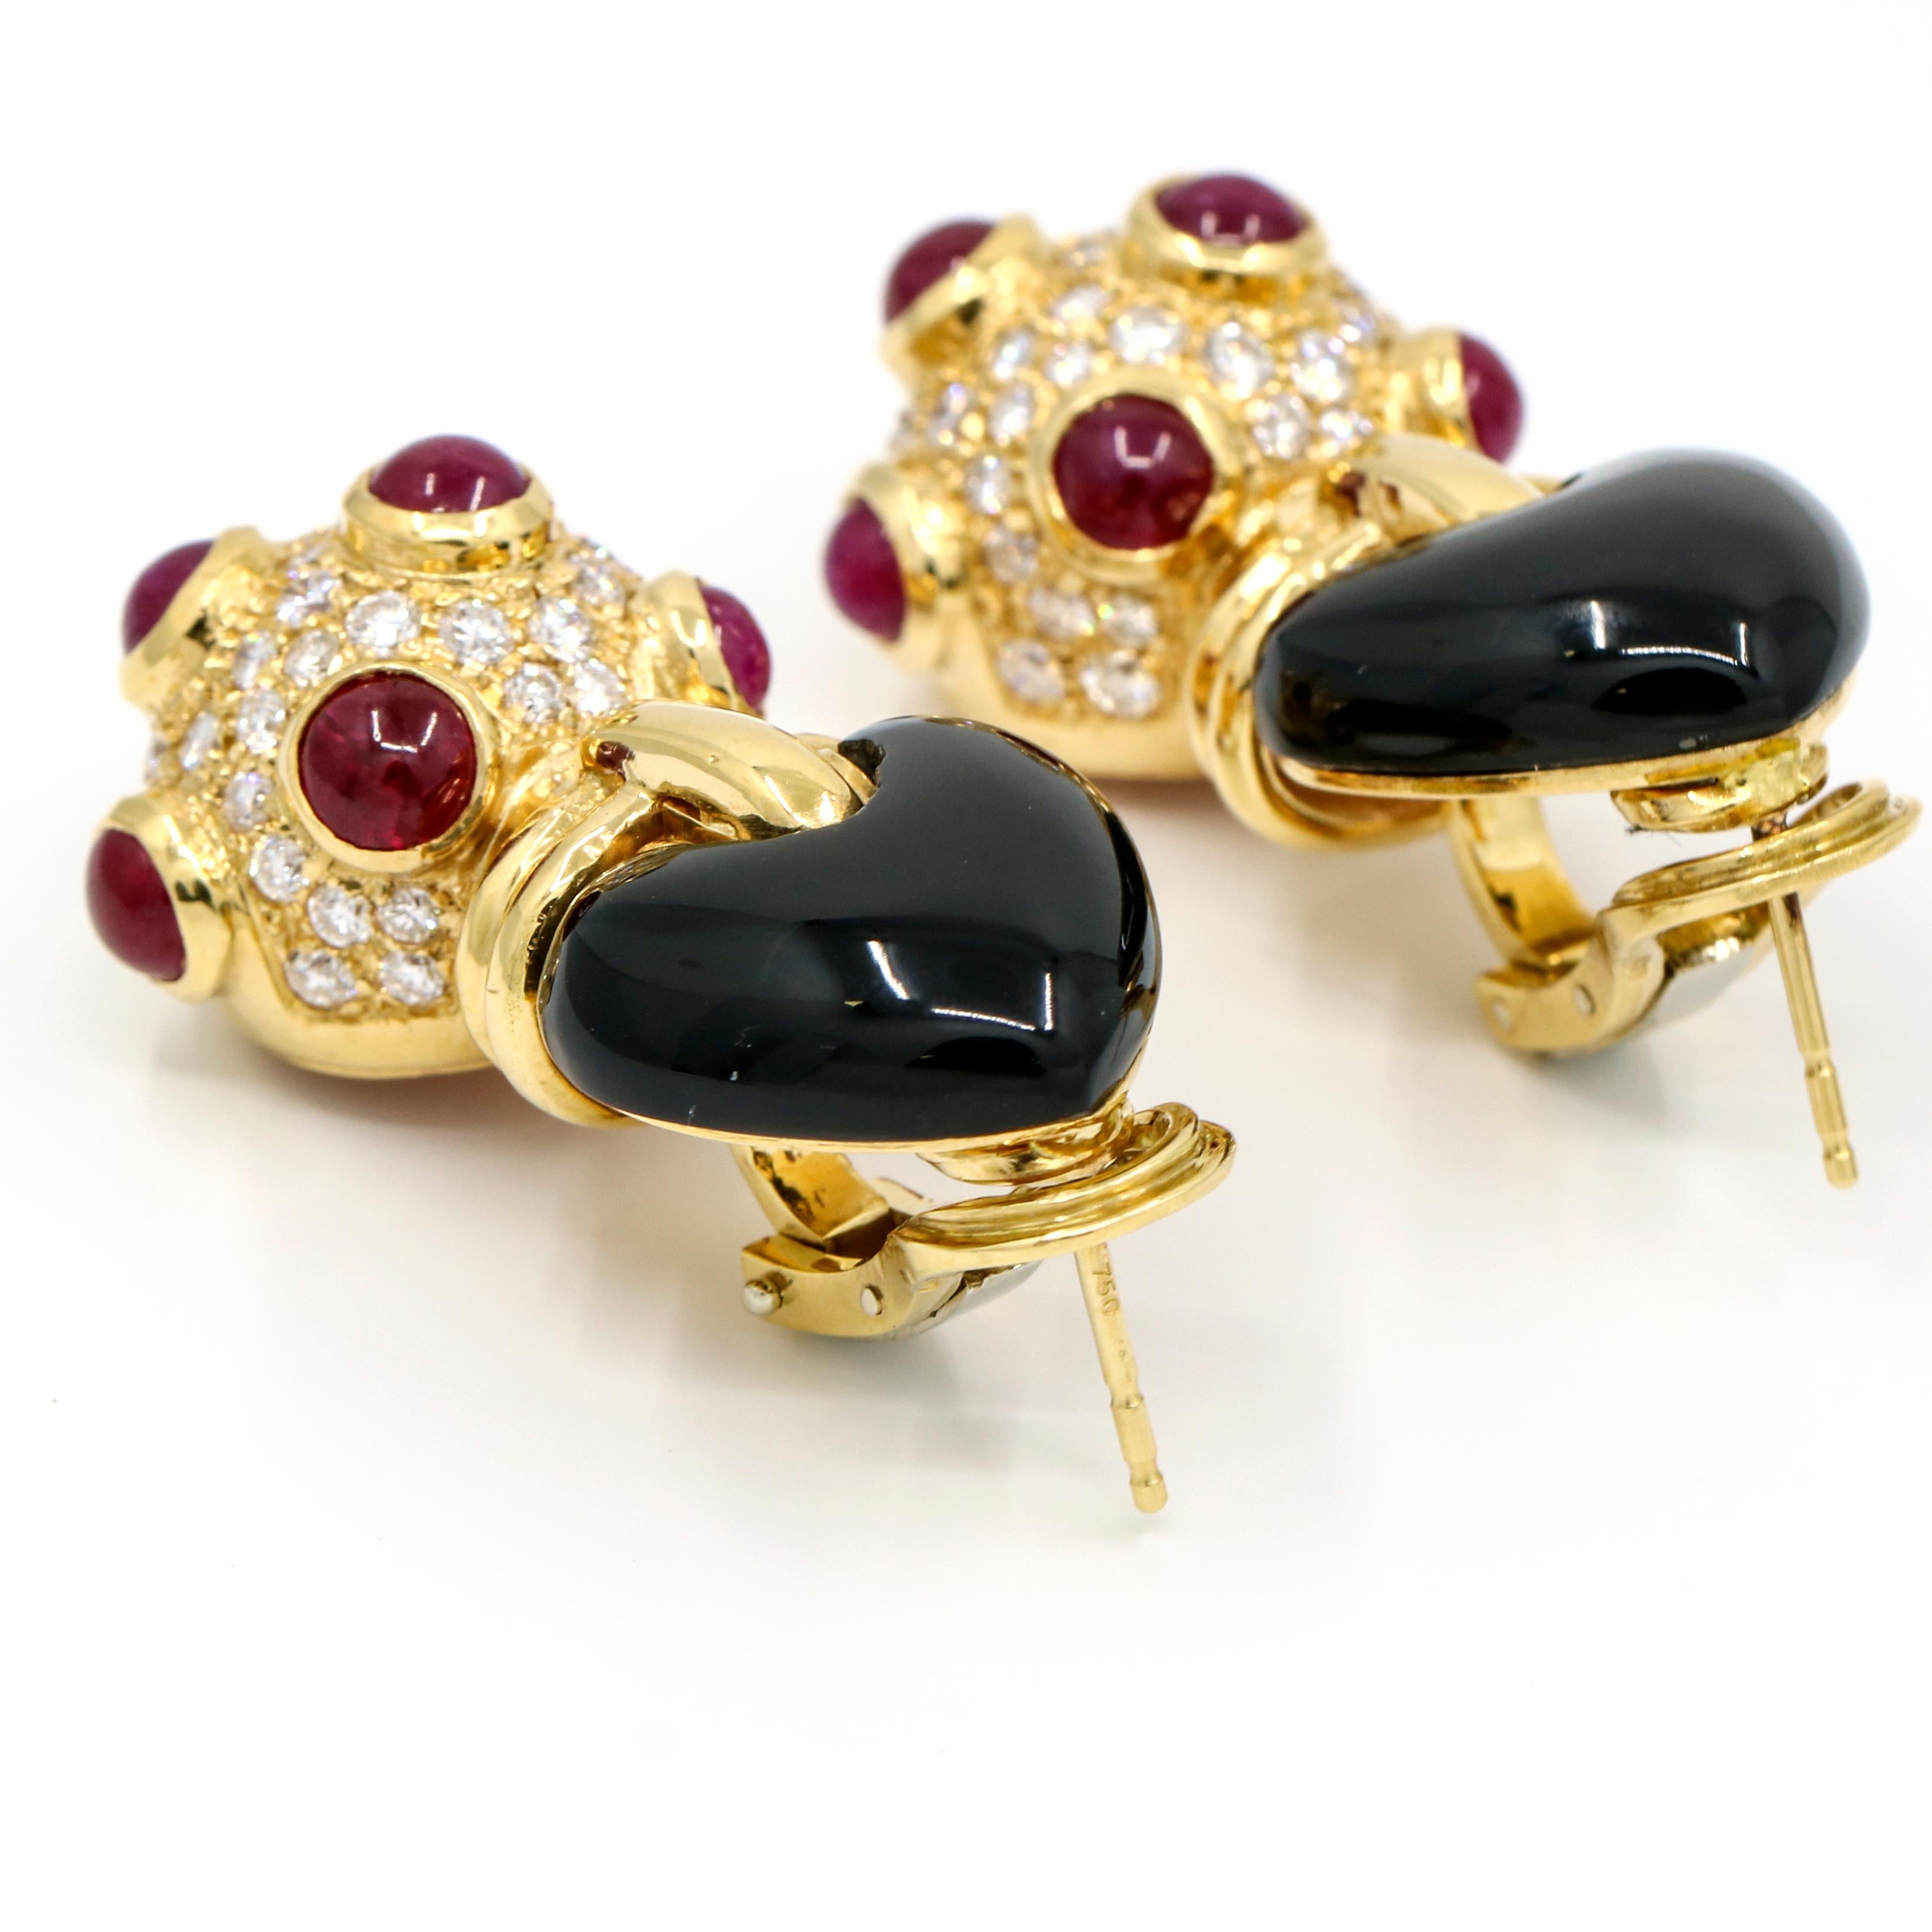 4.20 Carat 18 Karat Yellow Gold Onyx Diamond Ruby Drop Earrings In Excellent Condition For Sale In Fort Lauderdale, FL